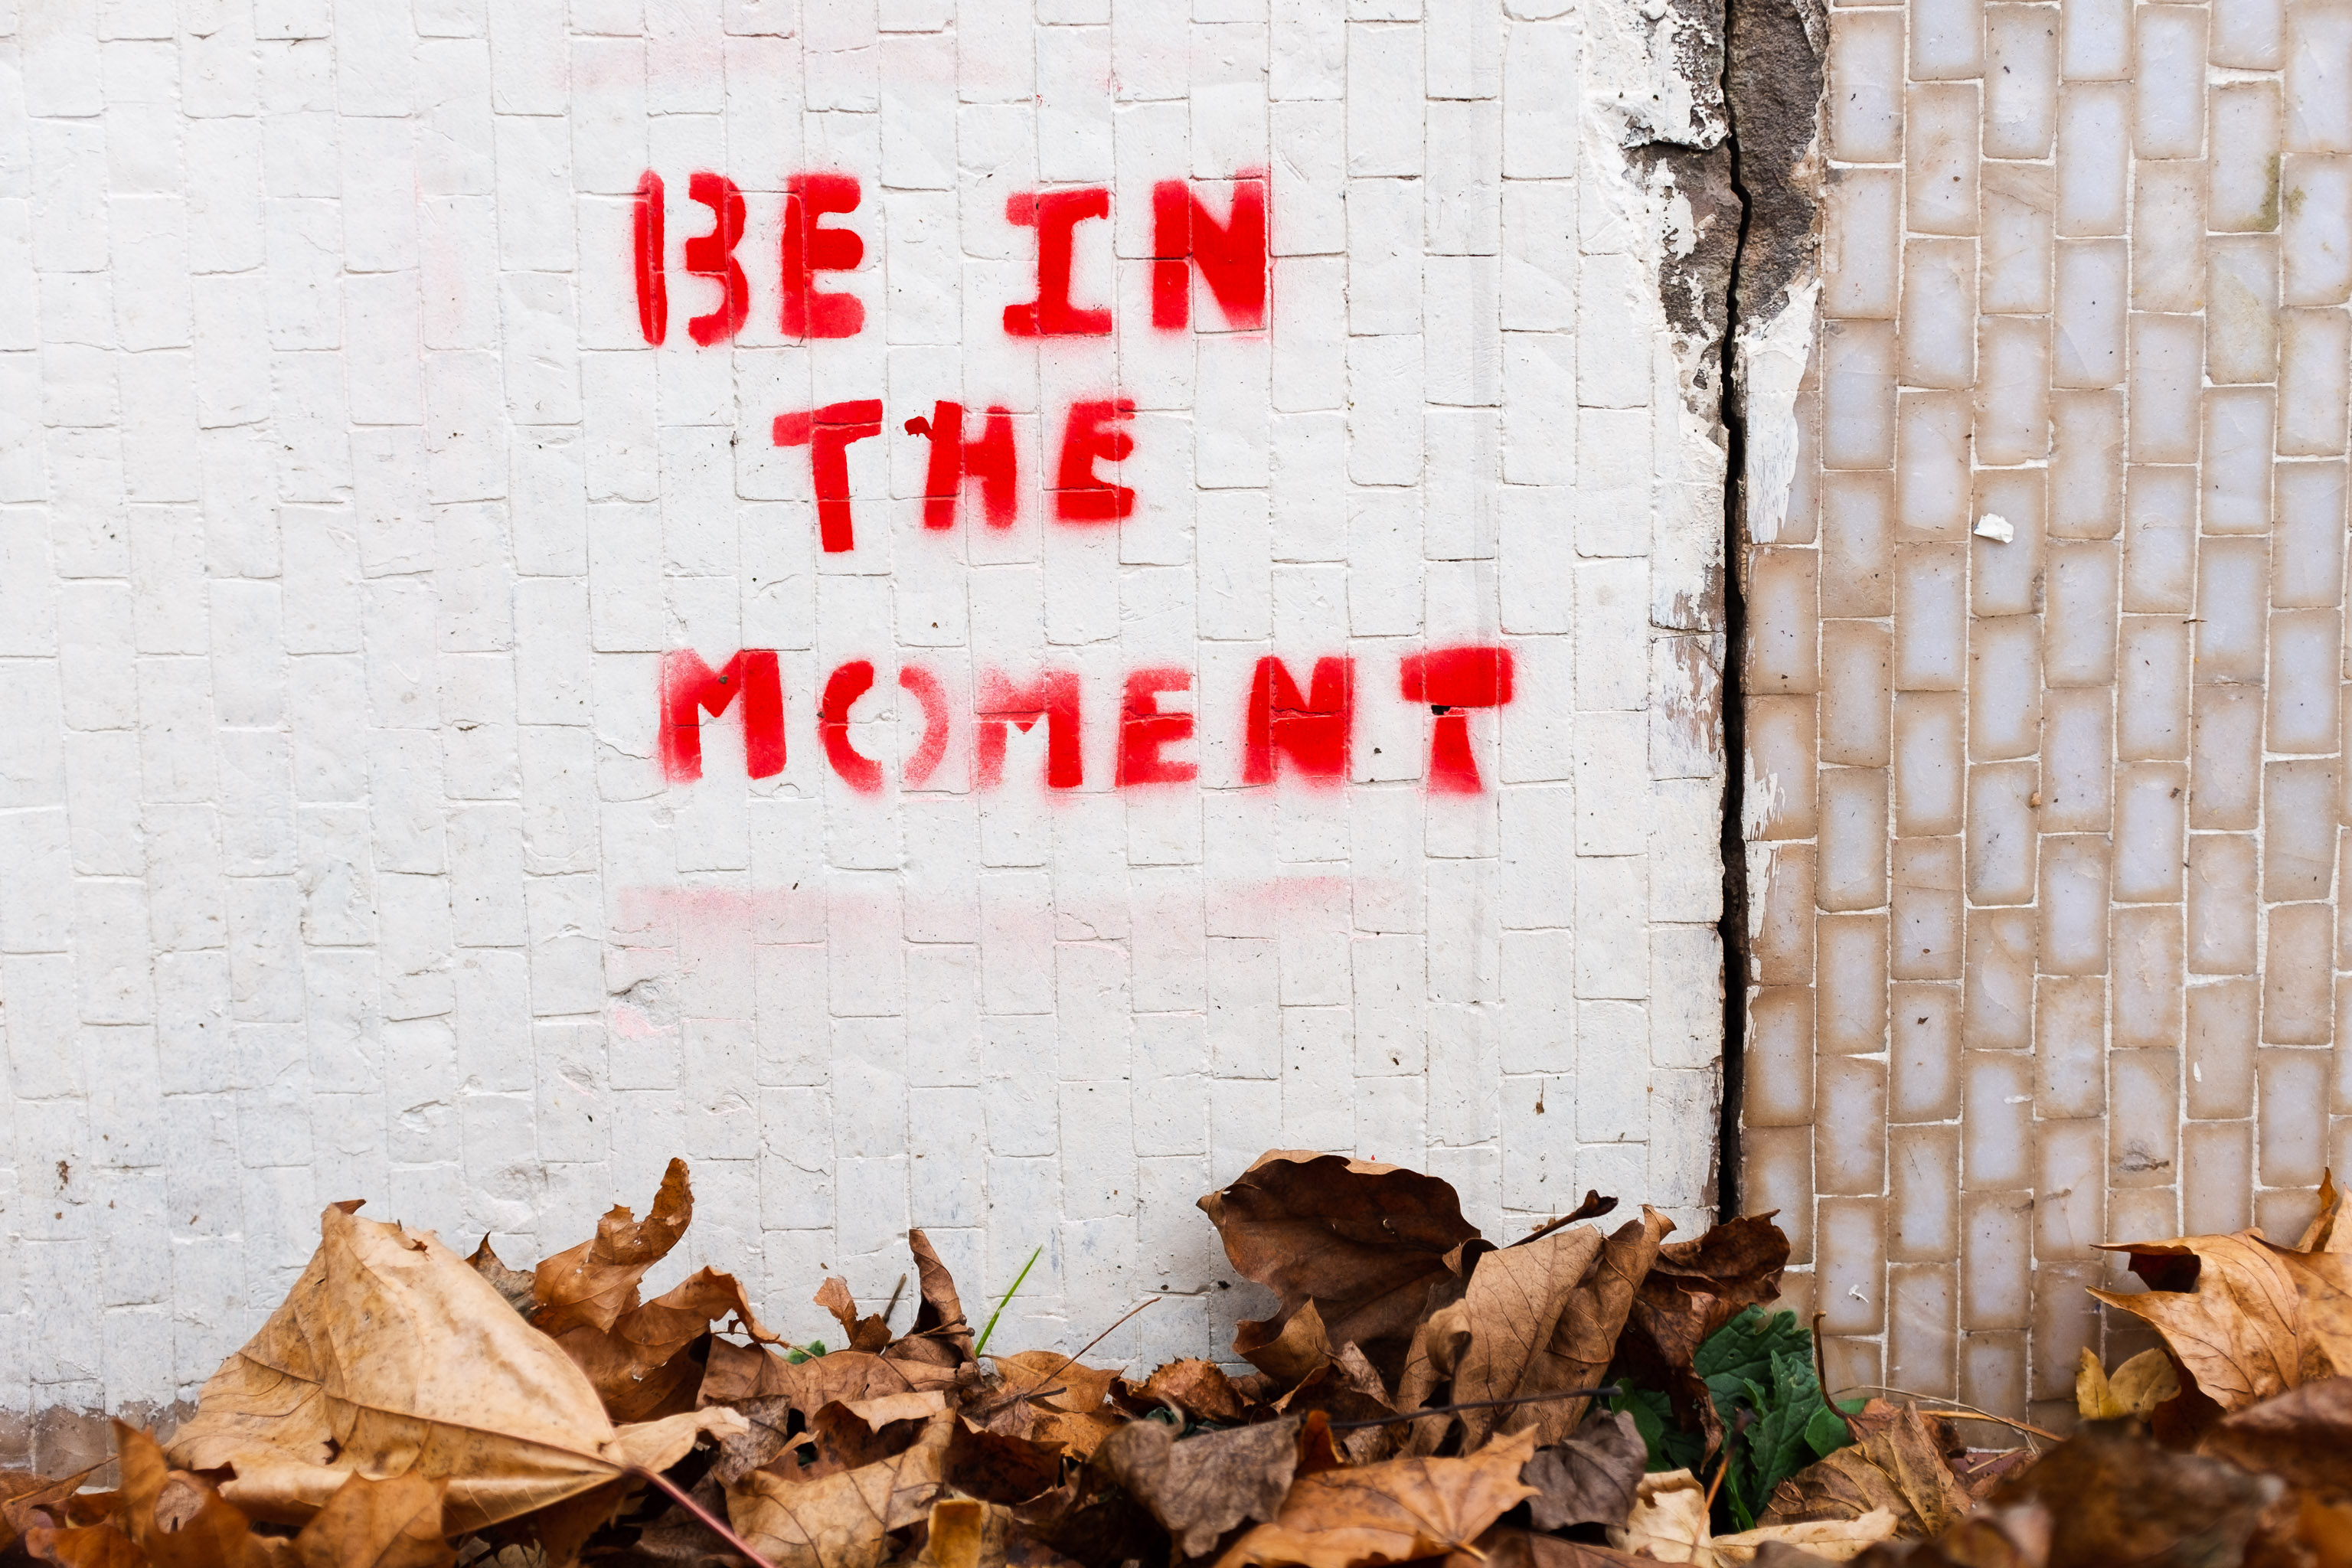 
                                Be In the Moment

                                                                    Advice I try to follow. I rarely succeed, though.

                                                                